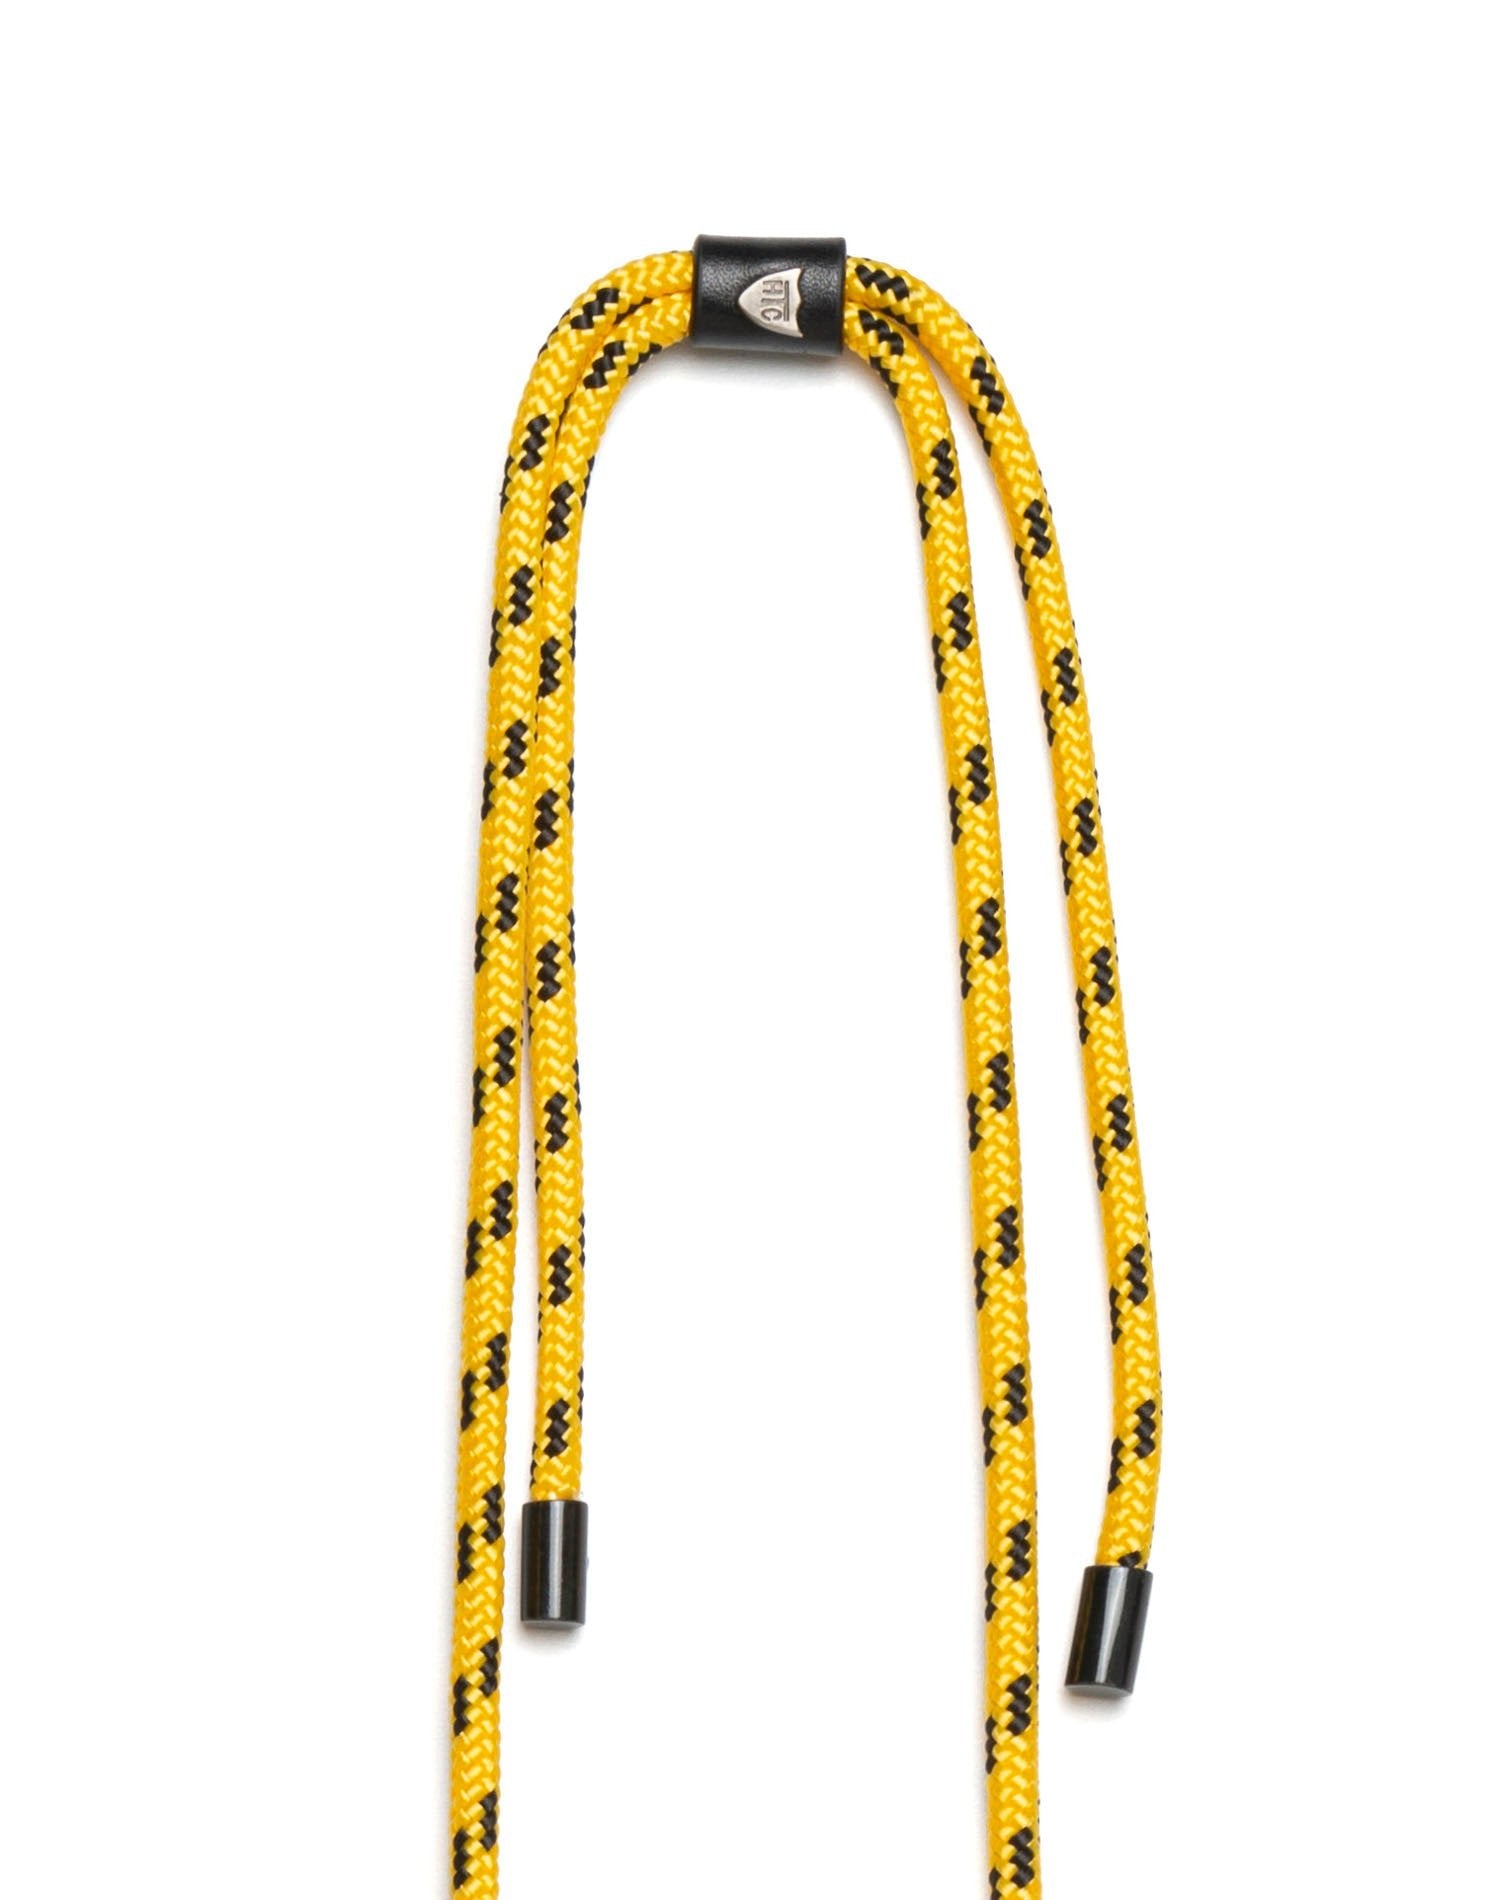 MINI ROPE IPHONE HOLDER Iphone 11 PRO MAX case with technical rope neck strap and leather logo detail. Adjustable length. Yellow/Black colour. HTC LOS ANGELES